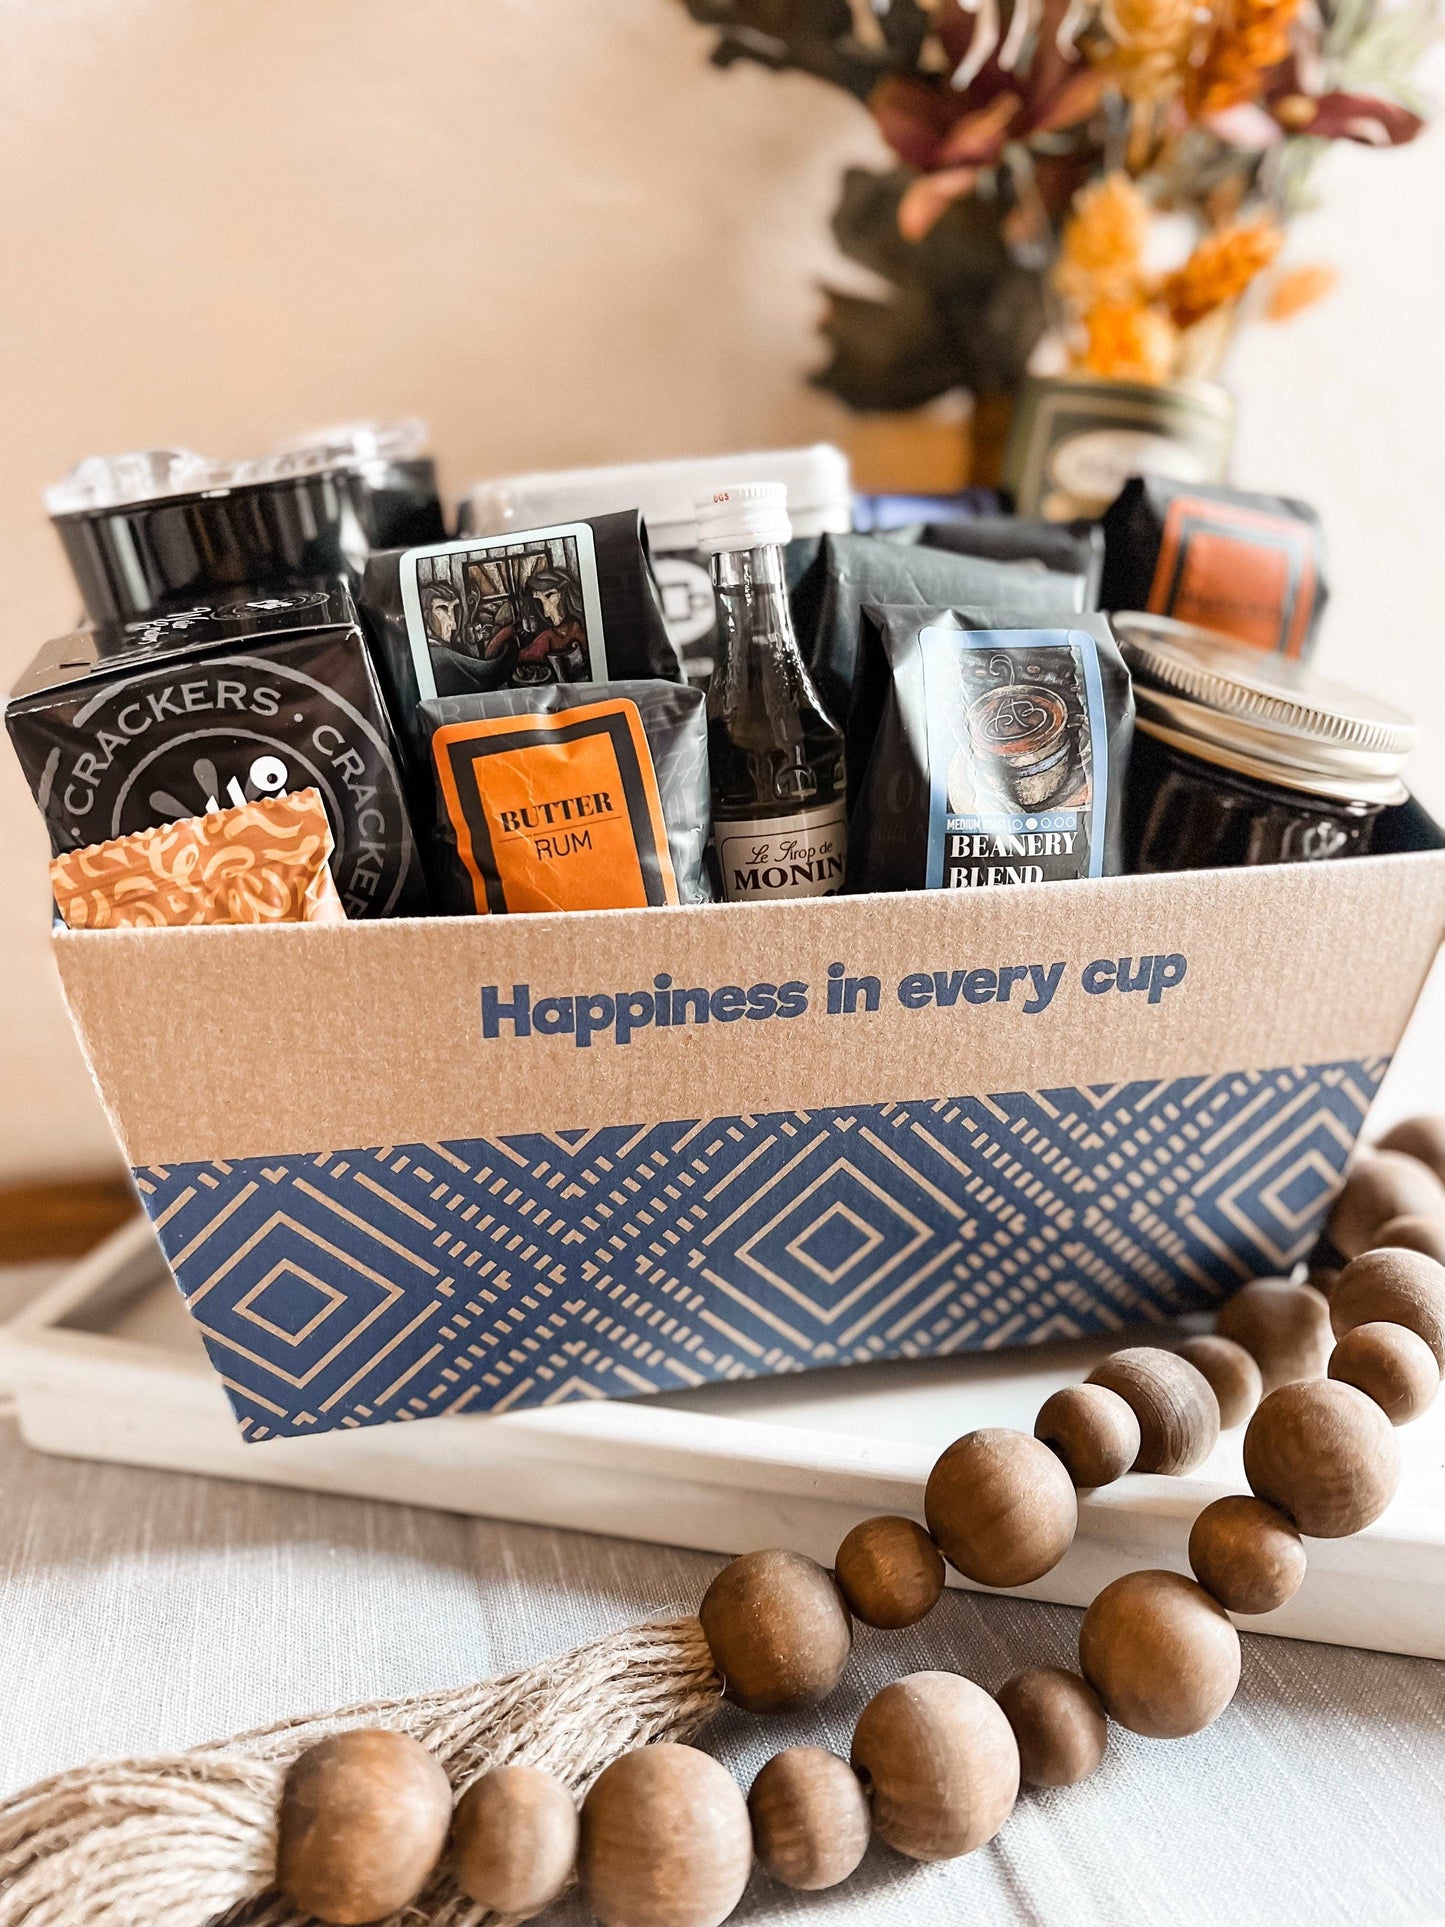 Flavorful Coffee Lovers Coffee Gift Basket - Delight them with a Coffee  Gift Set They'll Adore; Our Coffee Basket is the Finest Coffee Box; A Truly